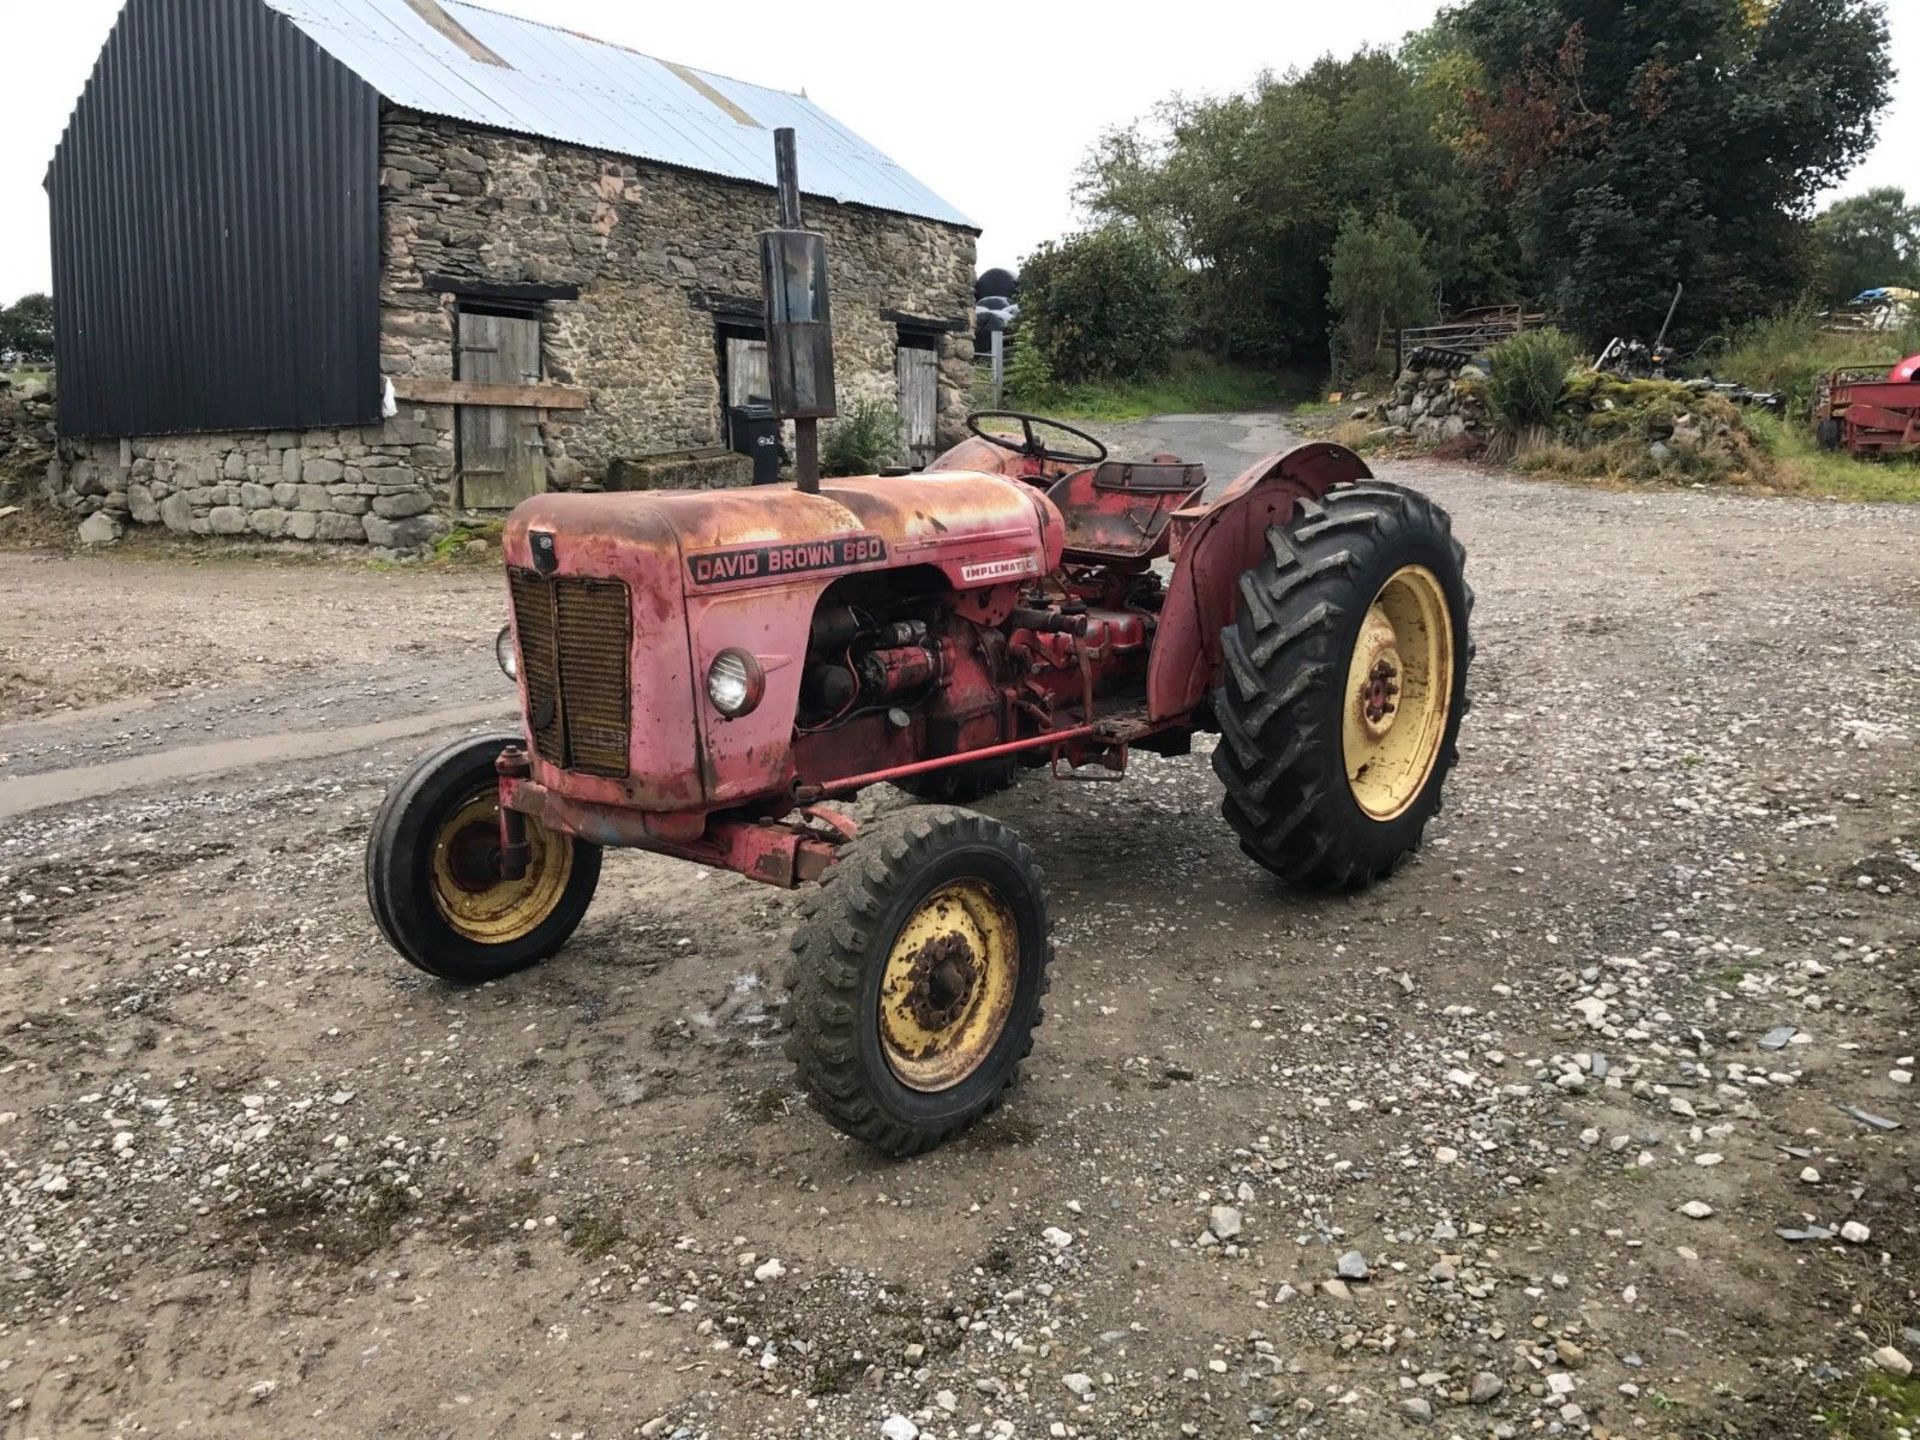 David Brown 880 Tractor 2wd 3 Cylinder - Image 4 of 9